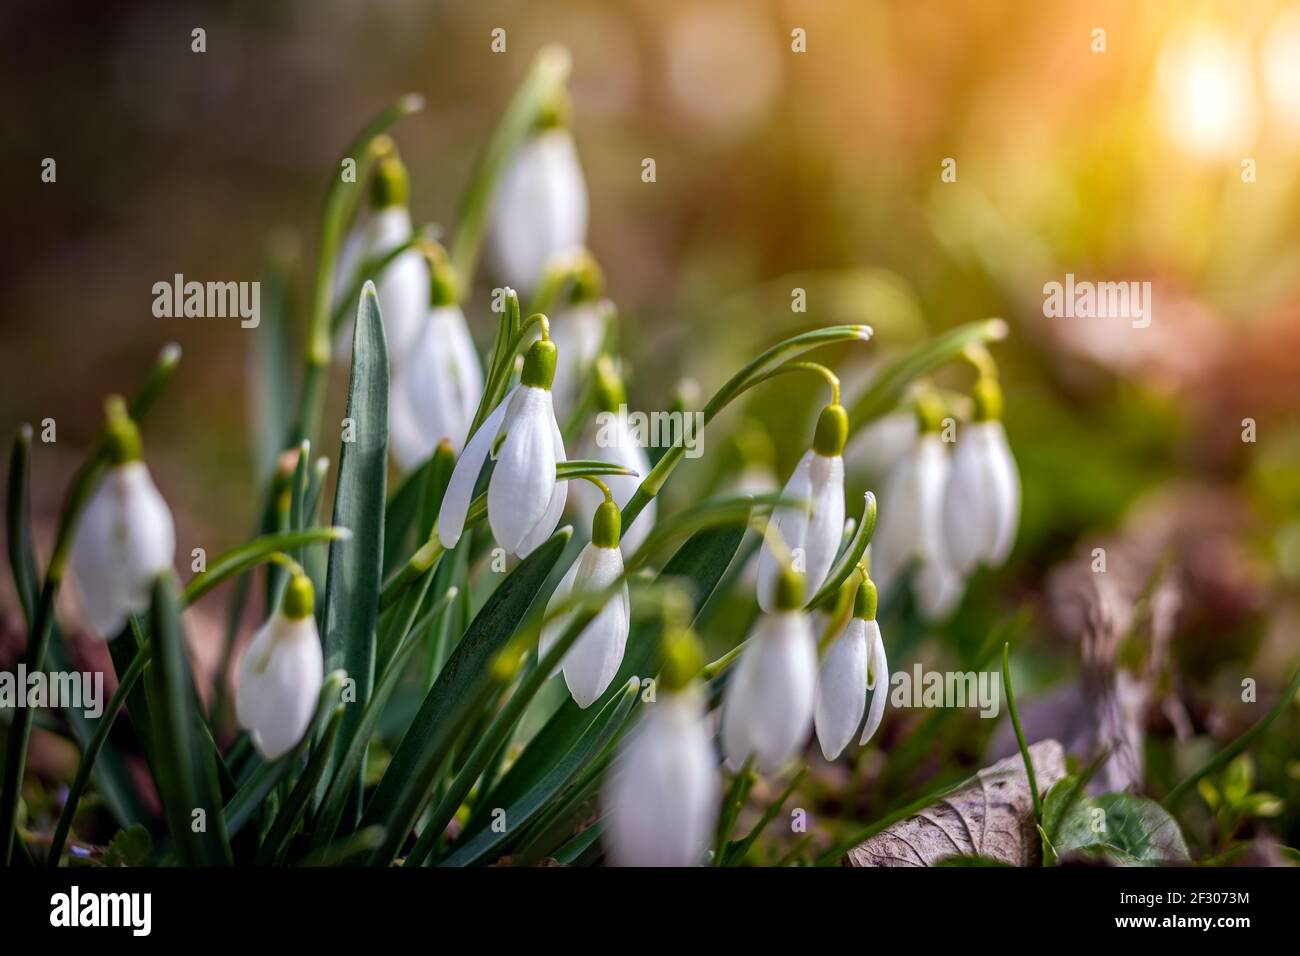 Snowdrop or common snowdrop (Galanthus nivalis) flowers in the forest with warm sunshine at background at springtime. The first flowers of the Spring Stock Photo